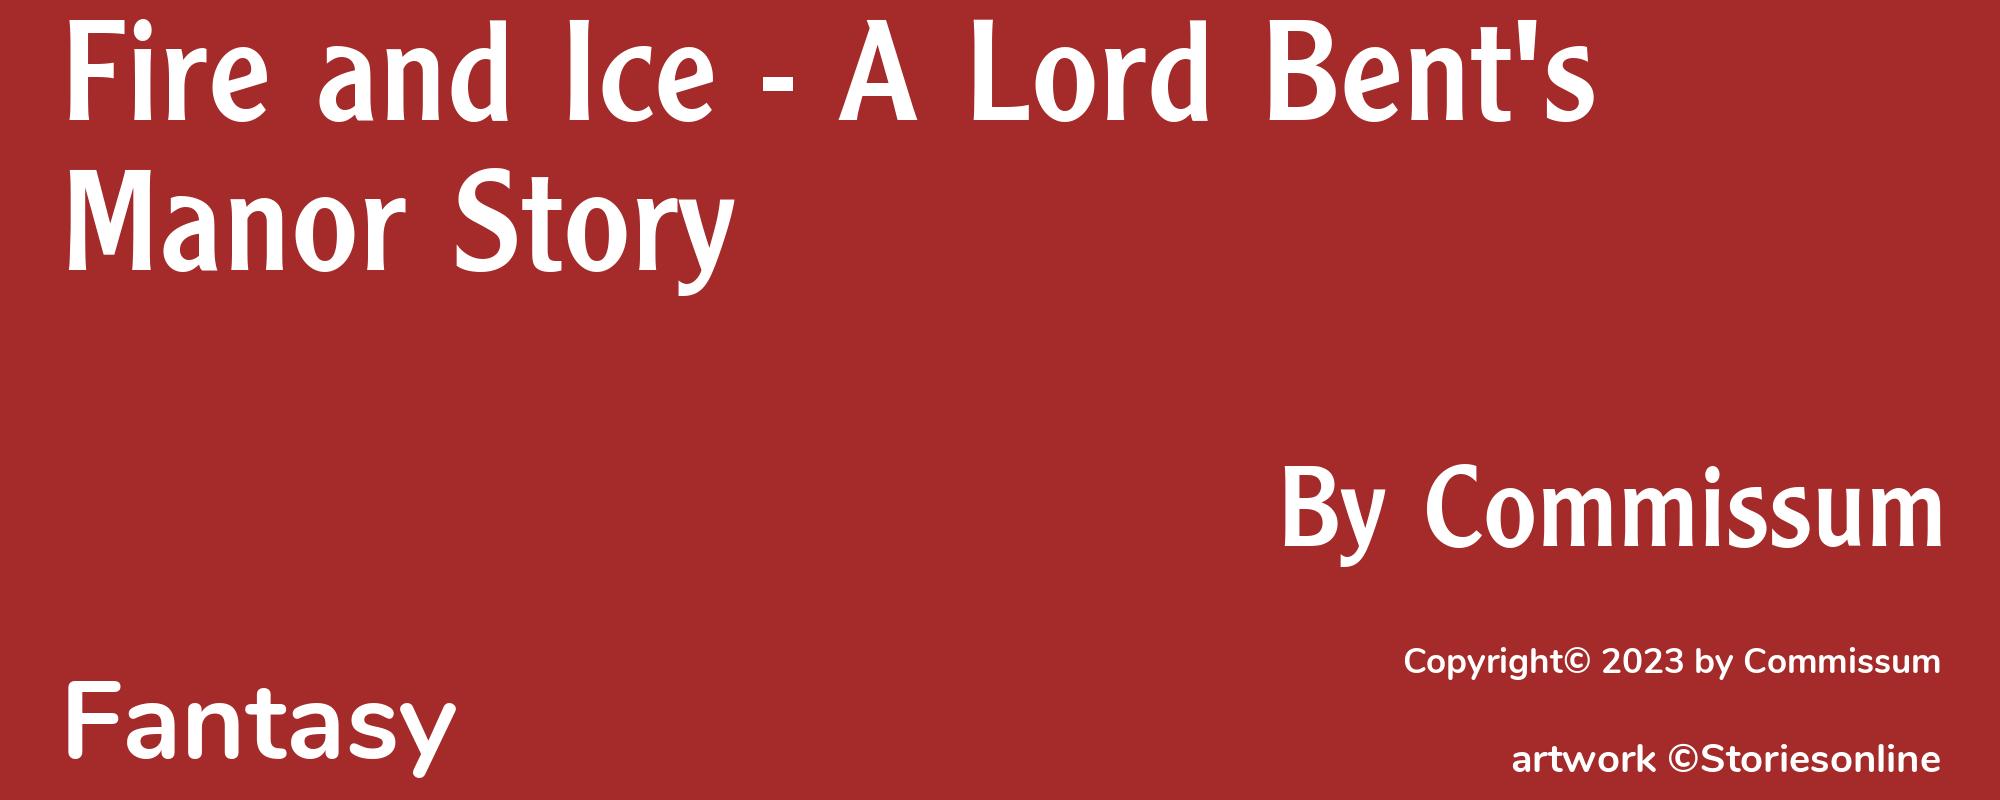 Fire and Ice - A Lord Bent's Manor Story - Cover